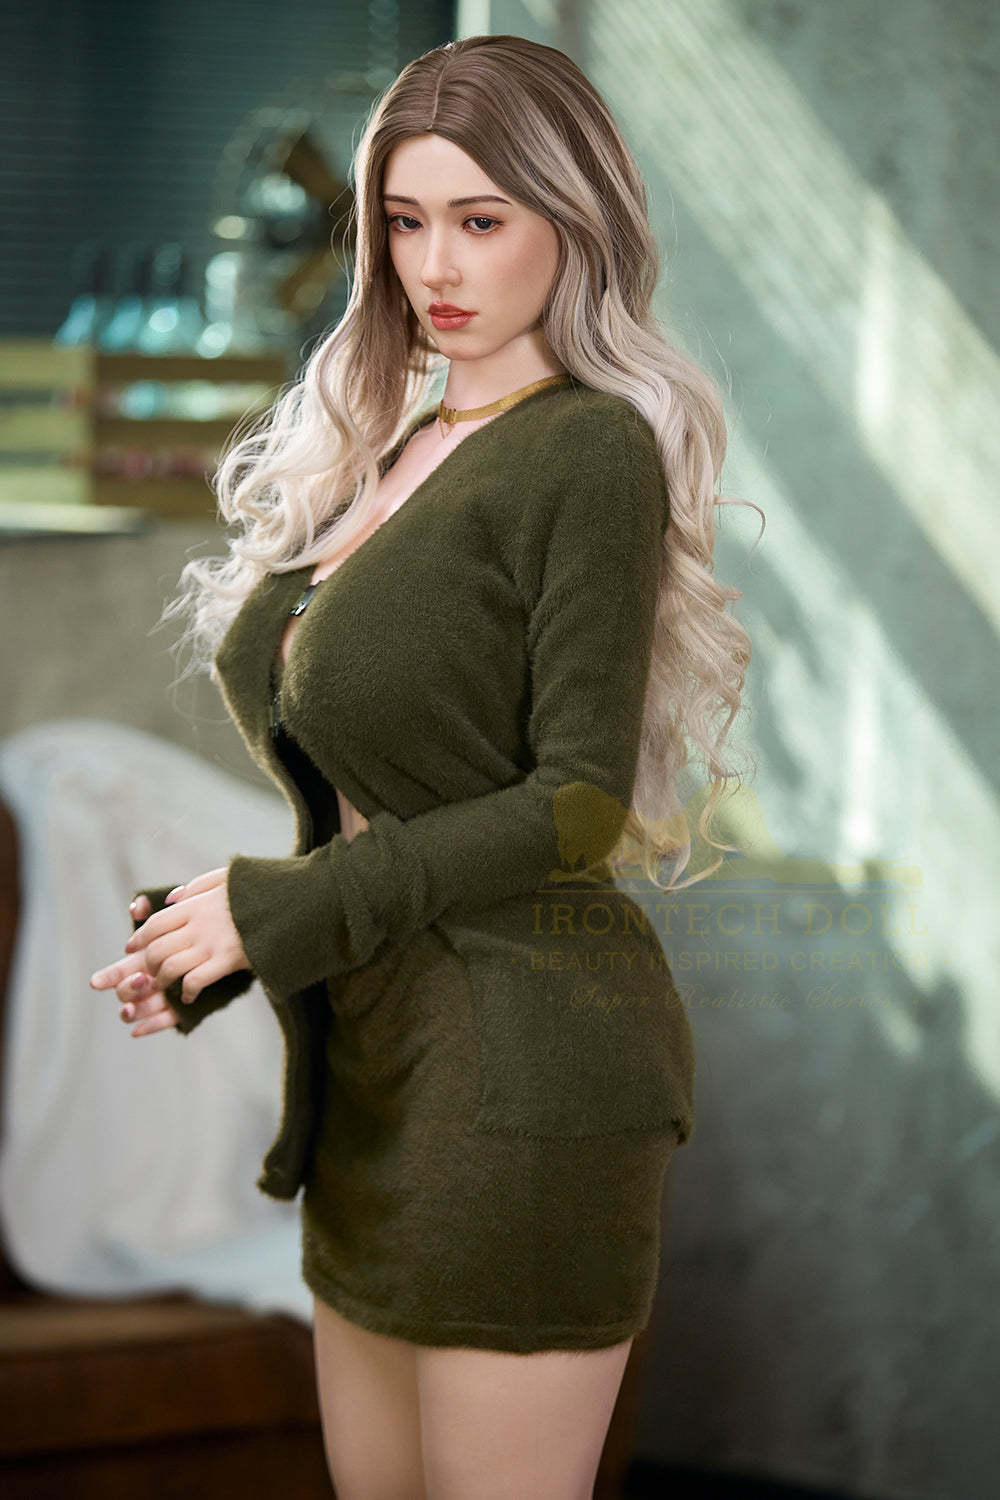 Irontechdoll Karlee 159cm S7 Full Silicone Sex Doll Natural Skin Big Boobs Adult Love Doll